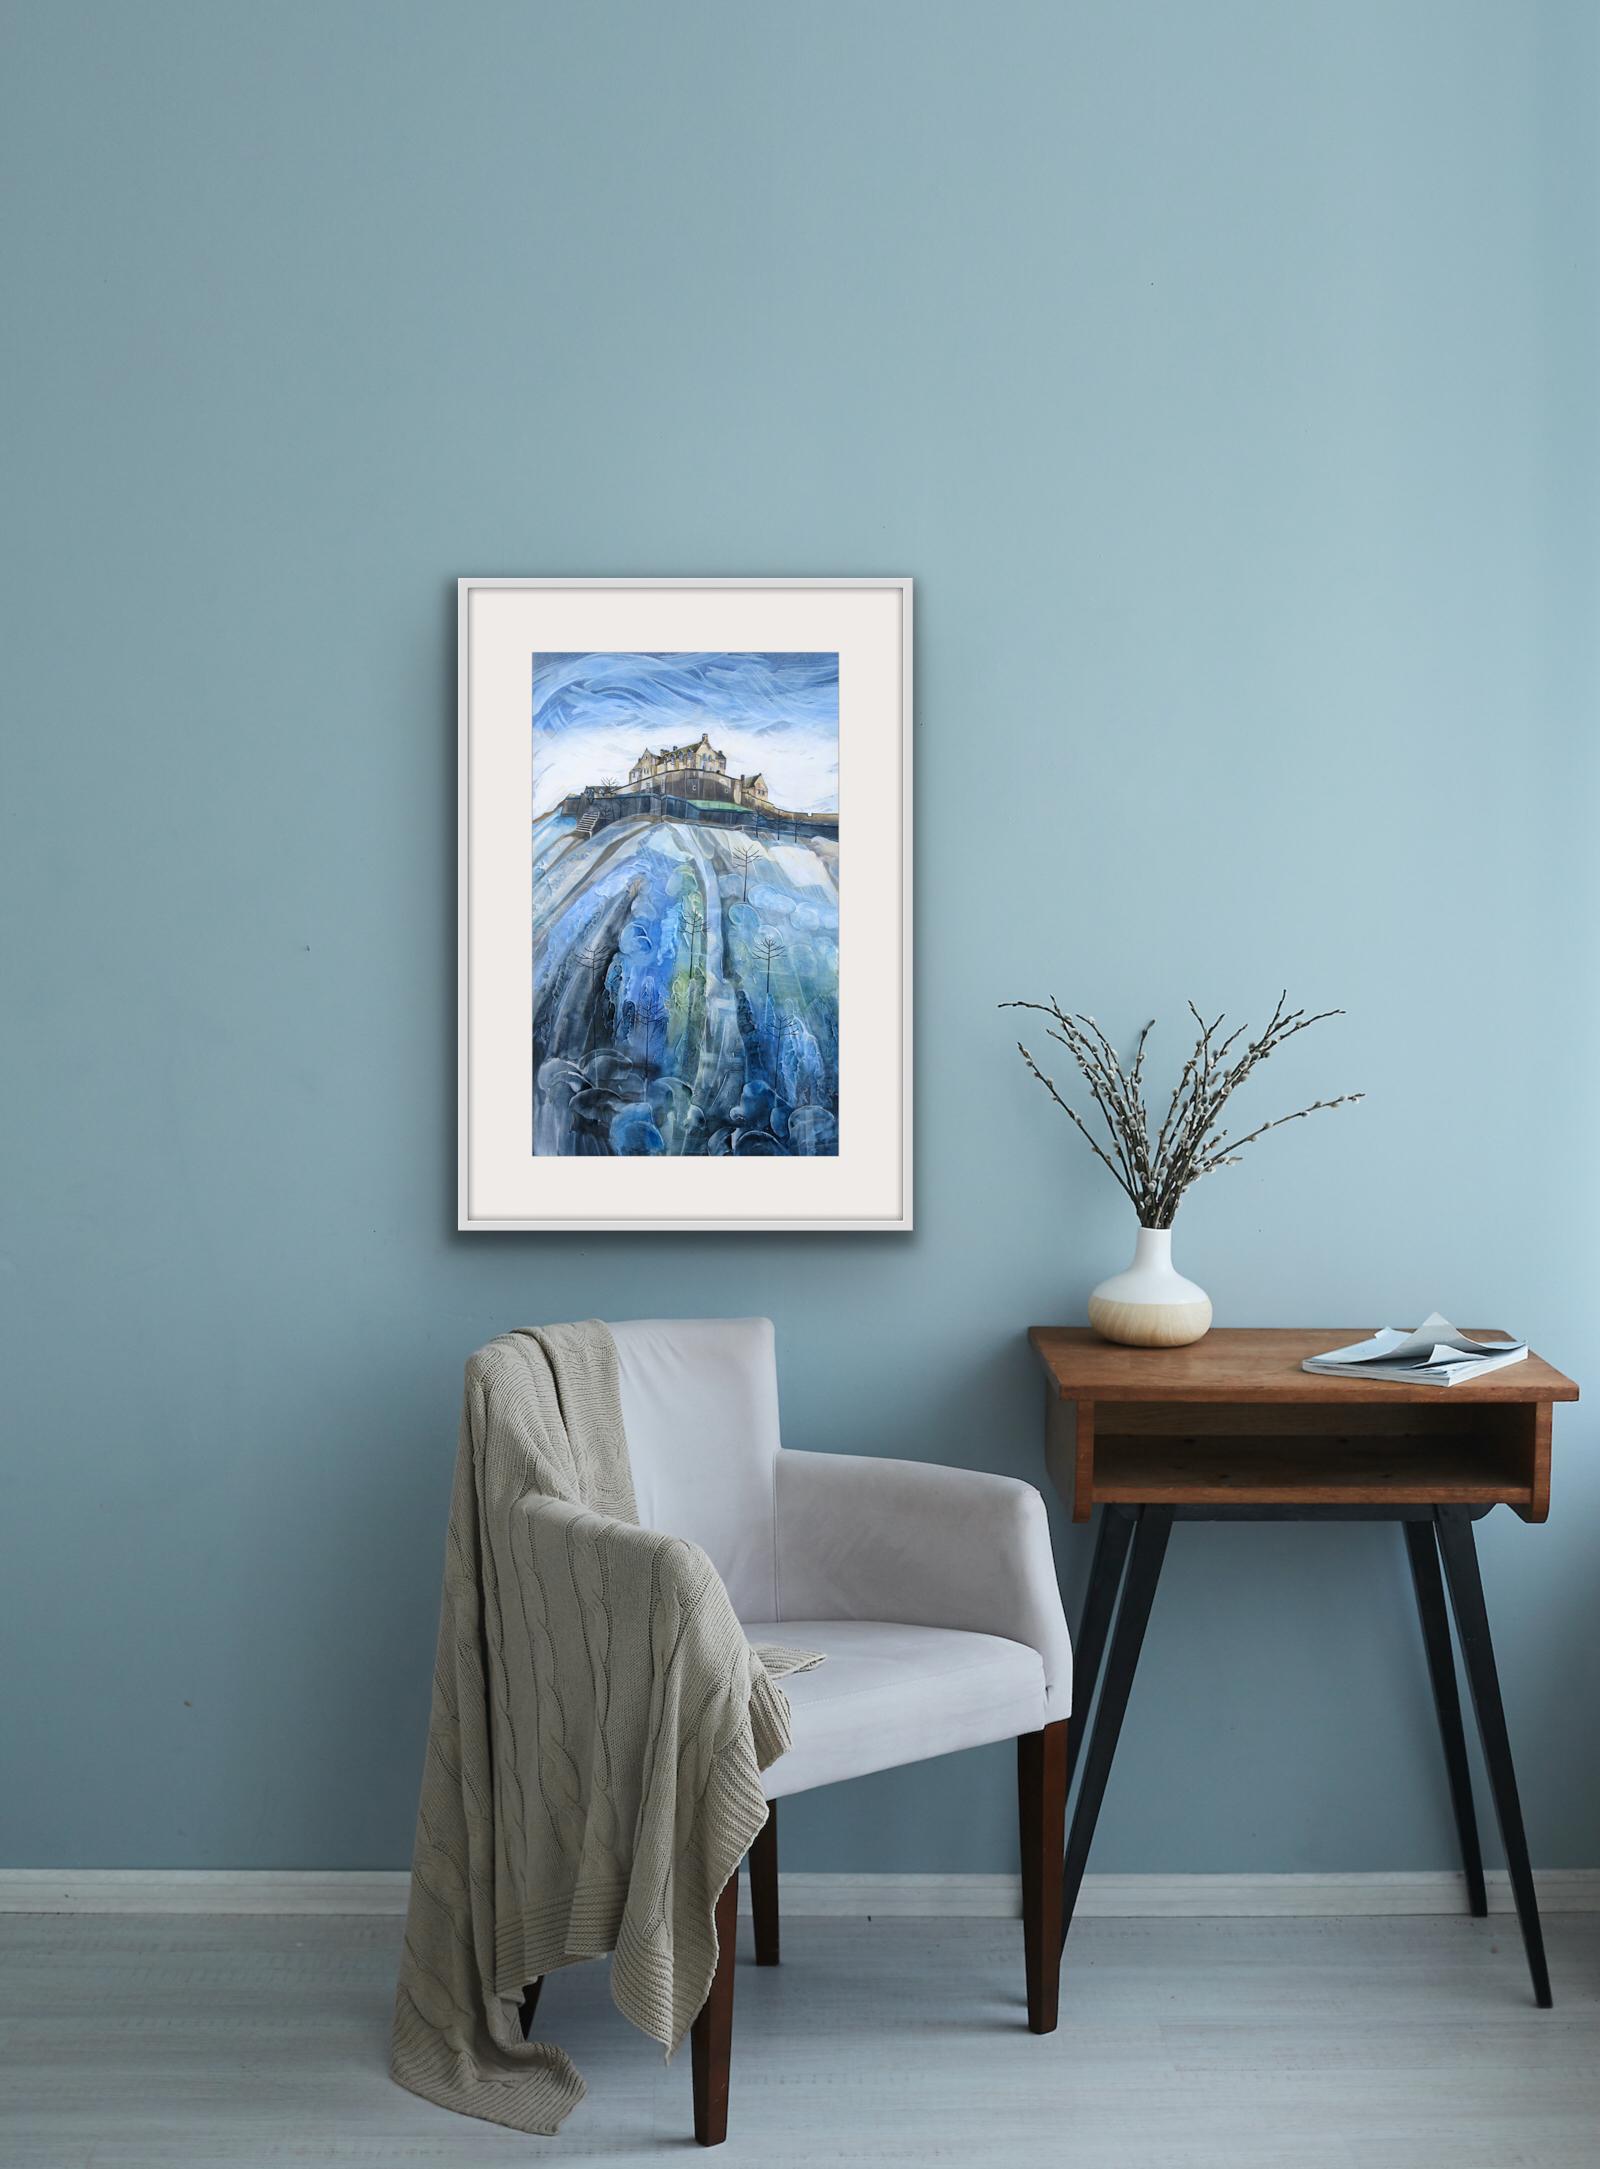 Castle Rock, Edinburgh by Anya Simmons 
Limited edition and hand signed by the artist 
Giclee Print on Paper 
Sold unframed 
Image size: H:75cm x W:52.5cm
Complete size of unframed image: H:75cm x W:52.5cm x D:0.1cm
This Giclée limited edition print